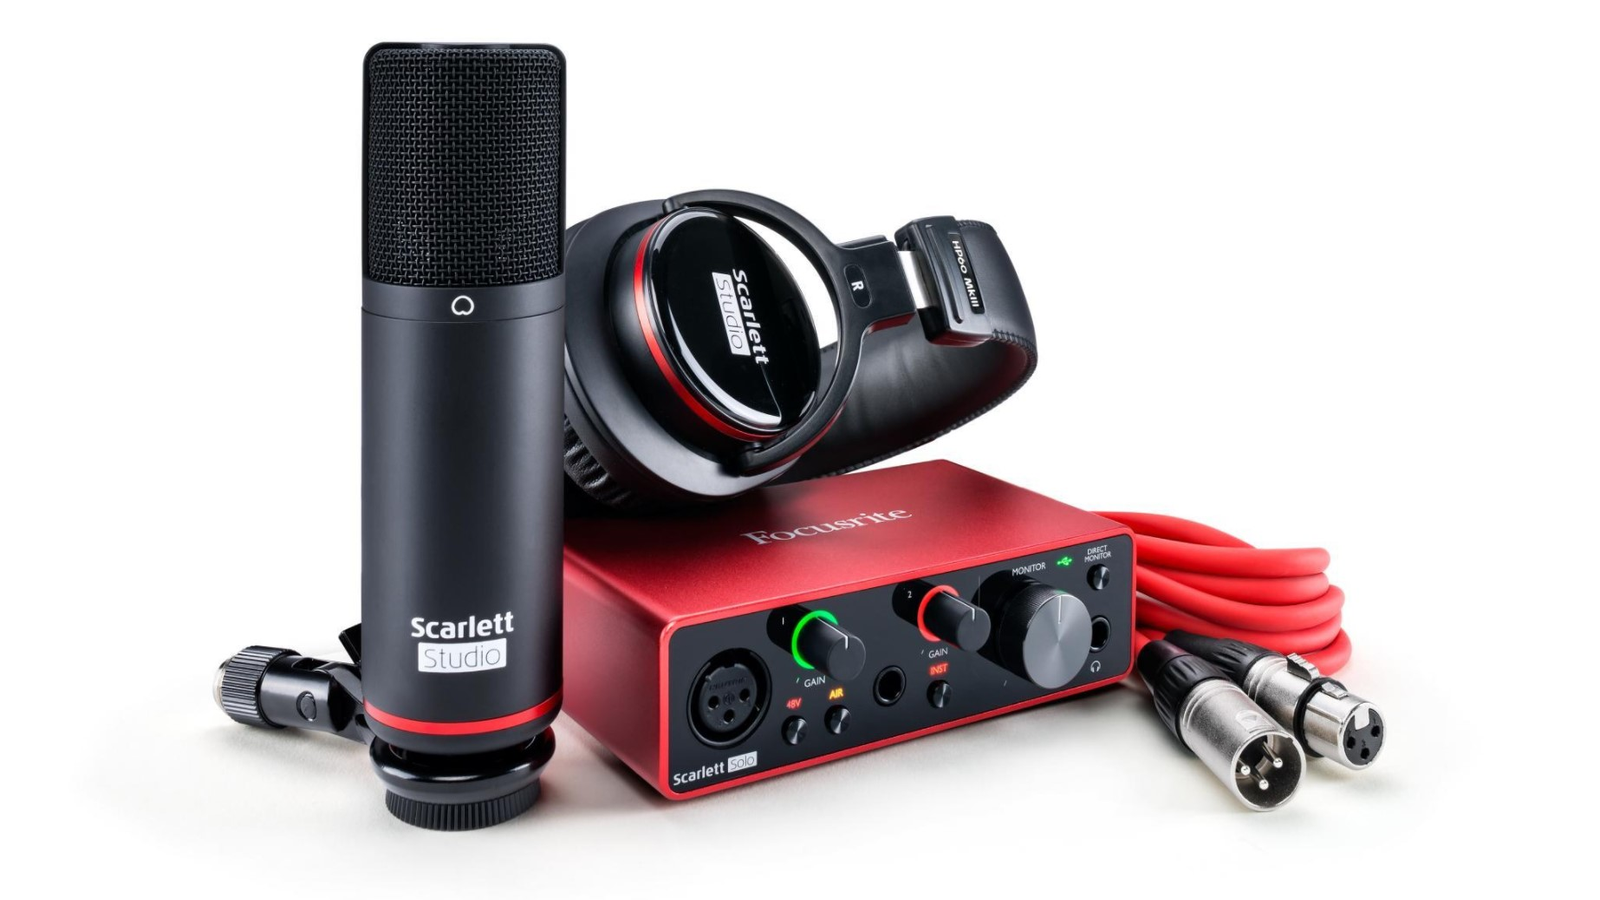 Focusrite Scarlet 2i2 is a great audio interface to help improve your  podcast efforts